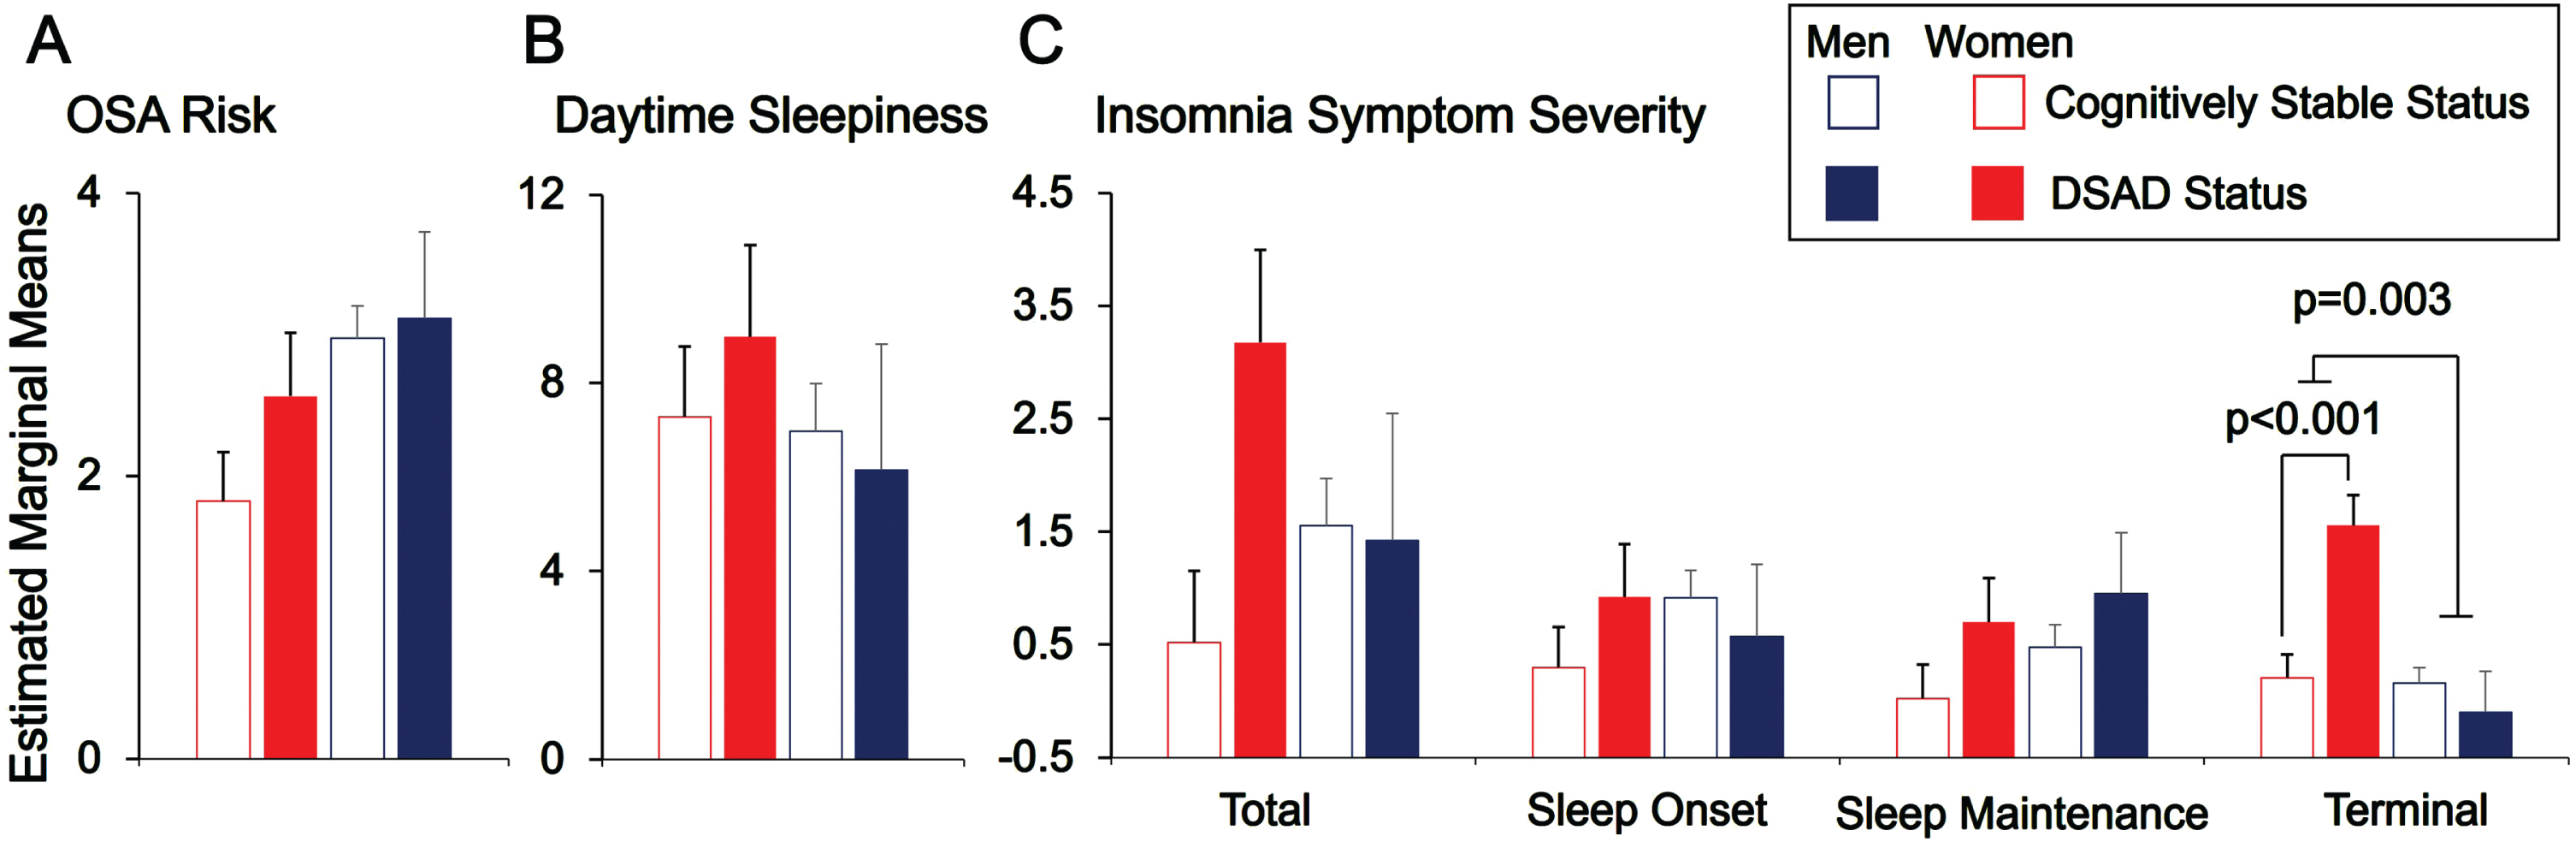 Obstructive sleep apnea (OSA) risk (STOP-Bang scores; A), excessive daytime sleepiness (Epworth Sleepiness Scale scores; B), and Insomnia symptom severity (C) by dementia status and sex in adults with Down syndrome. Bar plots of estimated marginal means in adult men (blue) and women (red) with Down syndrome-associated Alzheimer’s disease (DSAD; solid color) or who were cognitively stable (CS; outlined color) from ANCOVA models with sex [male, female], premorbid intellectual impairment [mild, moderate and severe], and dementia status [CS, DSAD] as between-subjects factors and age as a between-subjects covariates predicting insomnia symptom severity. Following FDR correction across sleep scales (6 comparisons), a significant sex×dementia status interaction term was detected for terminal insomnia symptom severity (p = 0.002, FDR p = 0.018). Least significant difference (LSD) post hoc testing revealed a significant difference in terminal insomnia symptom severity by dementia status for women (p < 0.001) but not for men (p = 0.508). Though the sex×dementia status interaction term was not significant for insomnia symptom severity total scores (p = 0.080, FDR p = 0.240), LSD post hoc testing revealed a significant difference in insomnia symptom severity total scores by dementia status for women (p = 0.015) but not for men (p = 0.916).